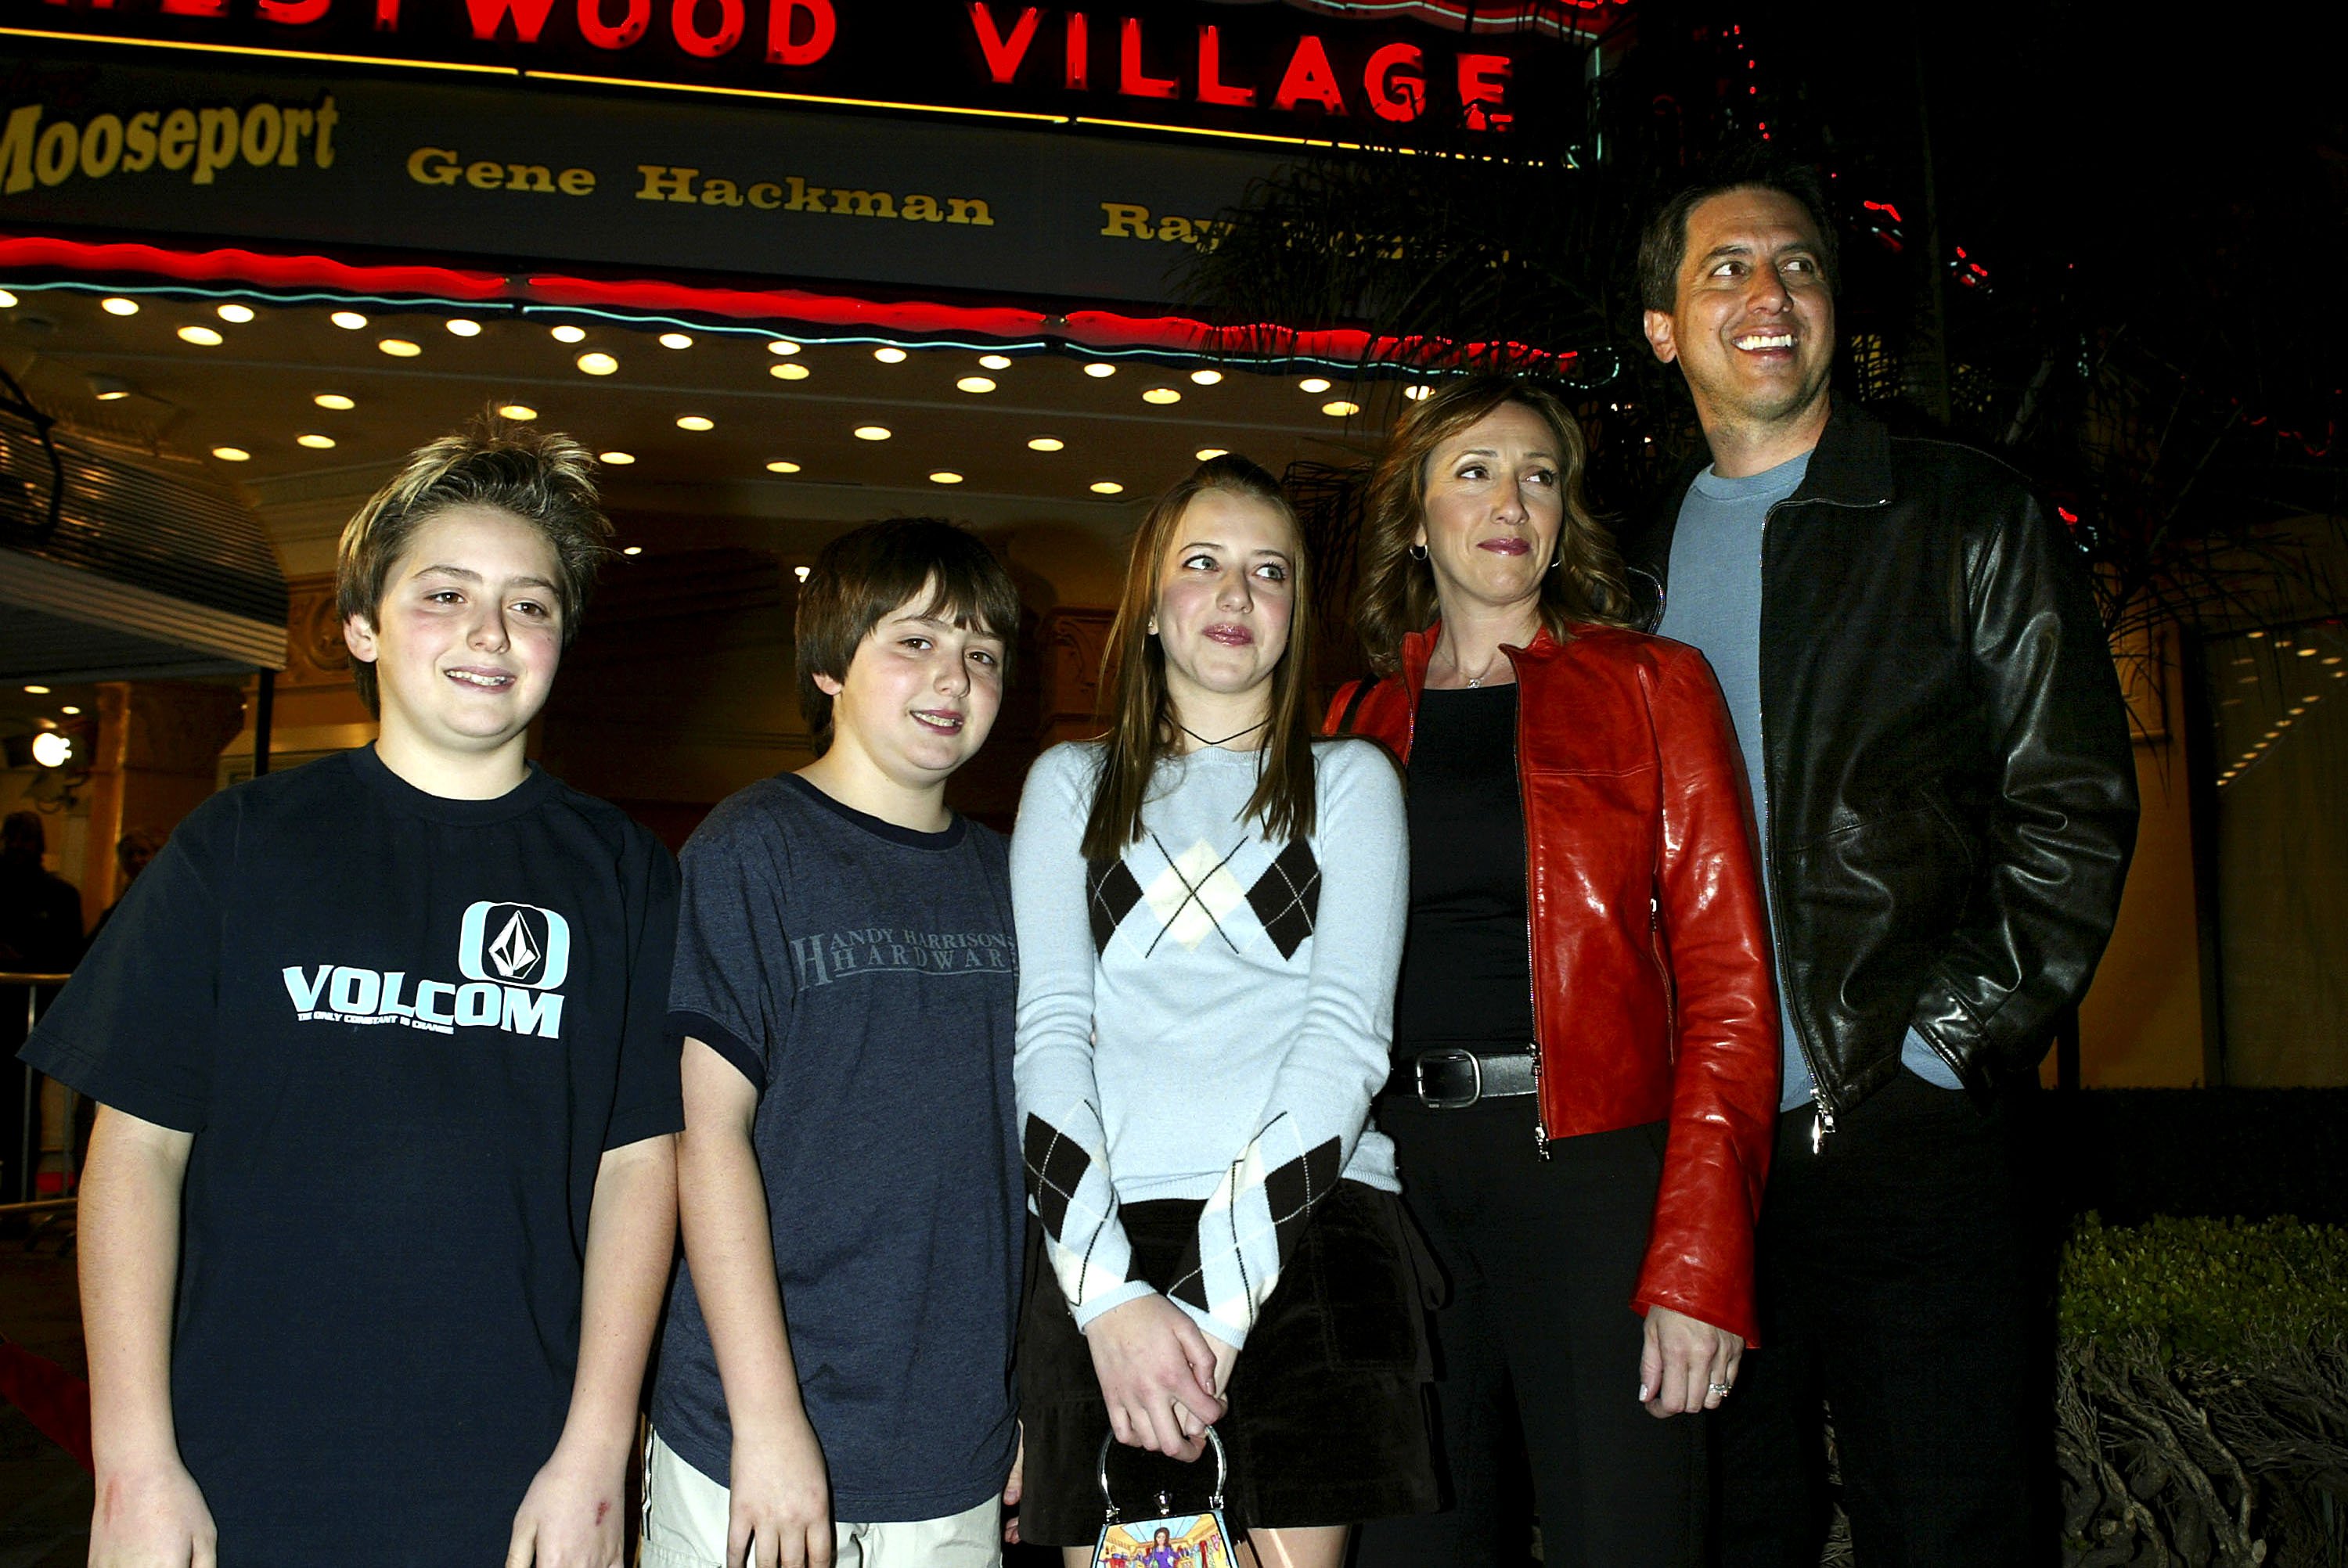 Actor Ray Romano (right) and his family, wife Anna, daughter Alexander (center) and twins, Matt (left) and Greg at the premiere of "Welcome to Mooseport" at the Village Theater on February 10, 2004 in Los Angeles, California. | Source: Getty Images